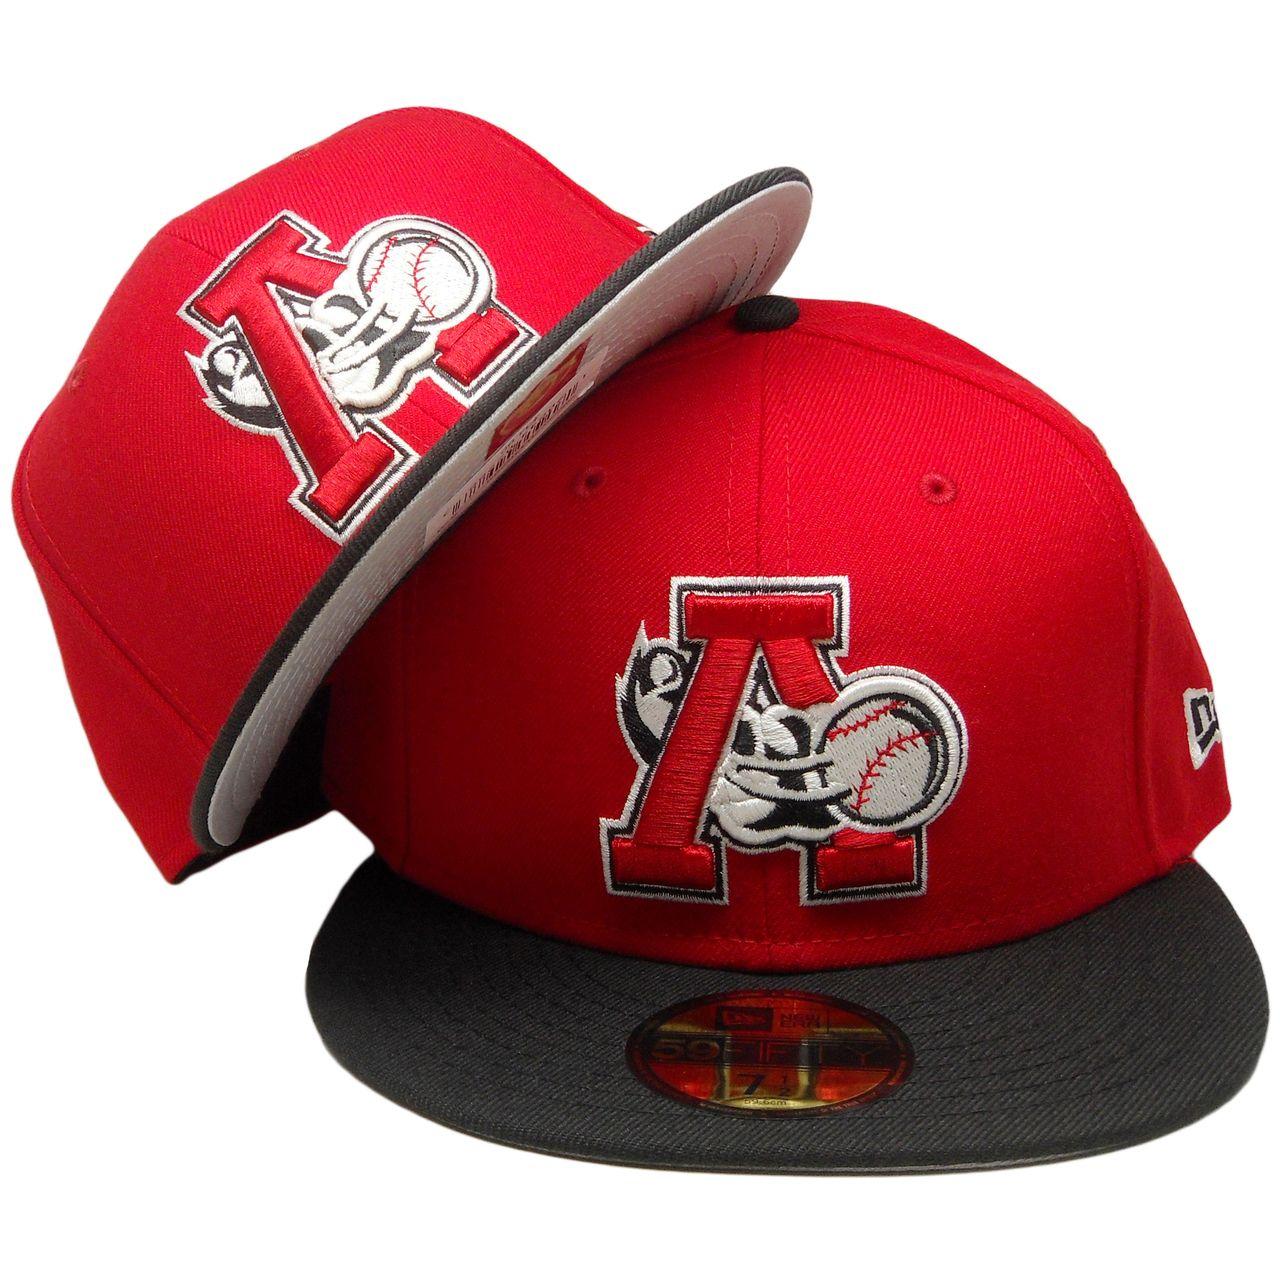 White with Red Curve Logo - Altoona Curves New Era 59Fifty Custom Fitted Hat - Red, Black, White ...